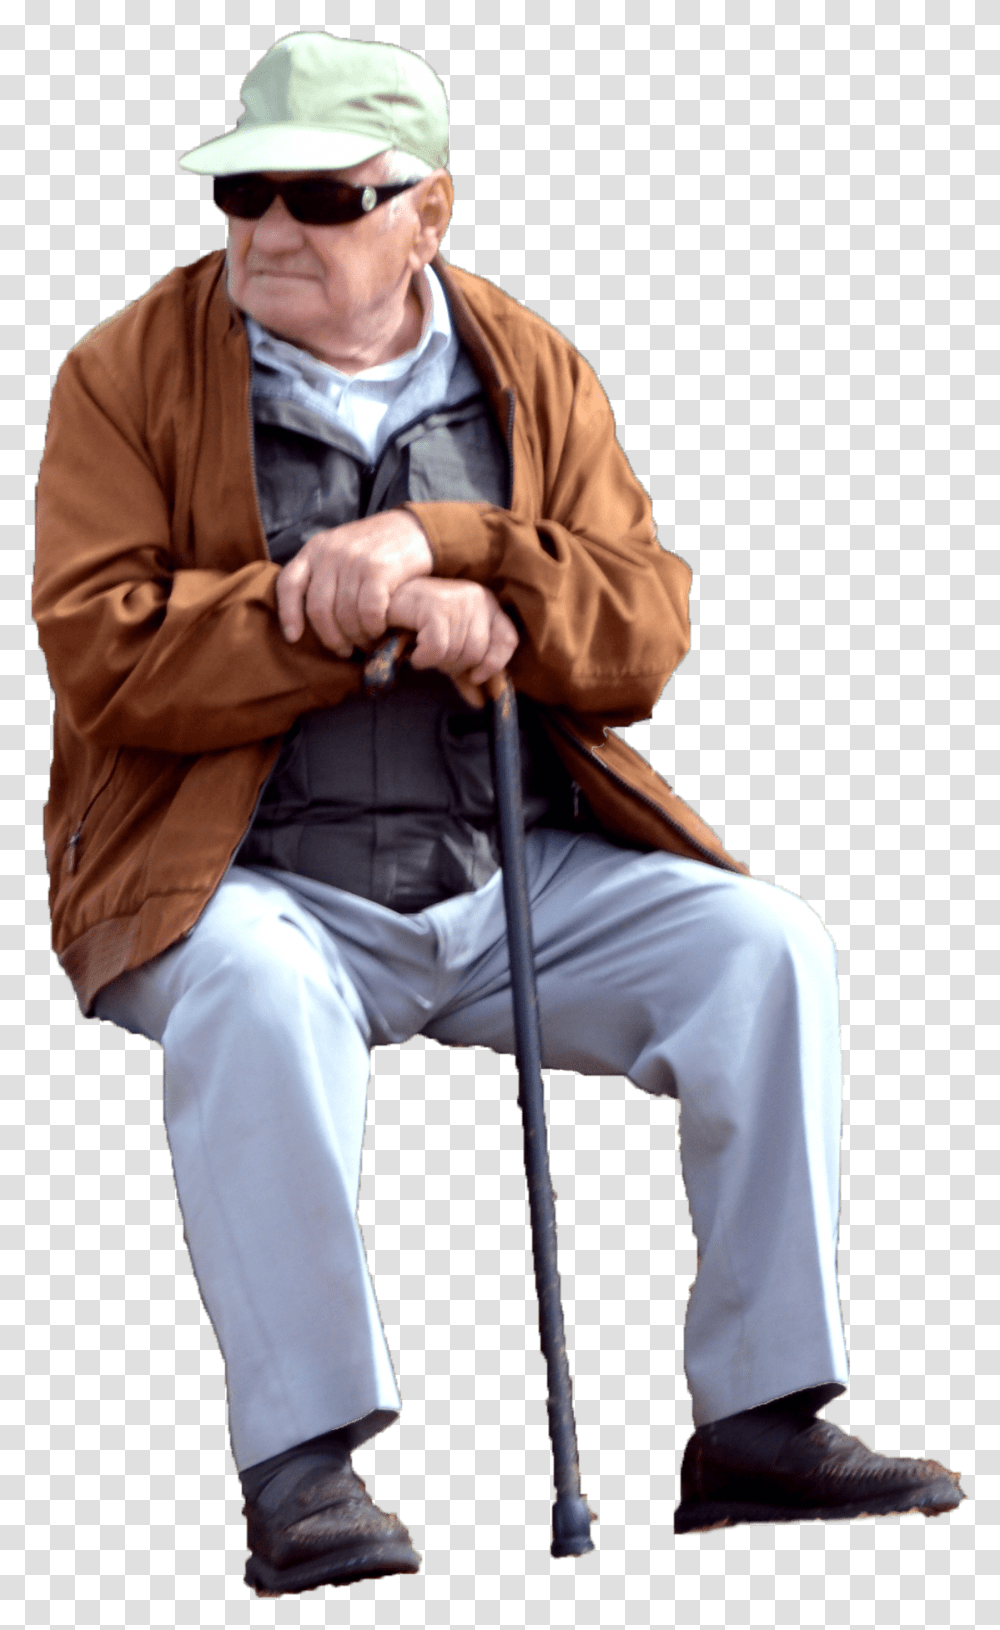 Sitting Old Man In Coat Download Old Person Sitting, Sunglasses, Stick, Cane Transparent Png